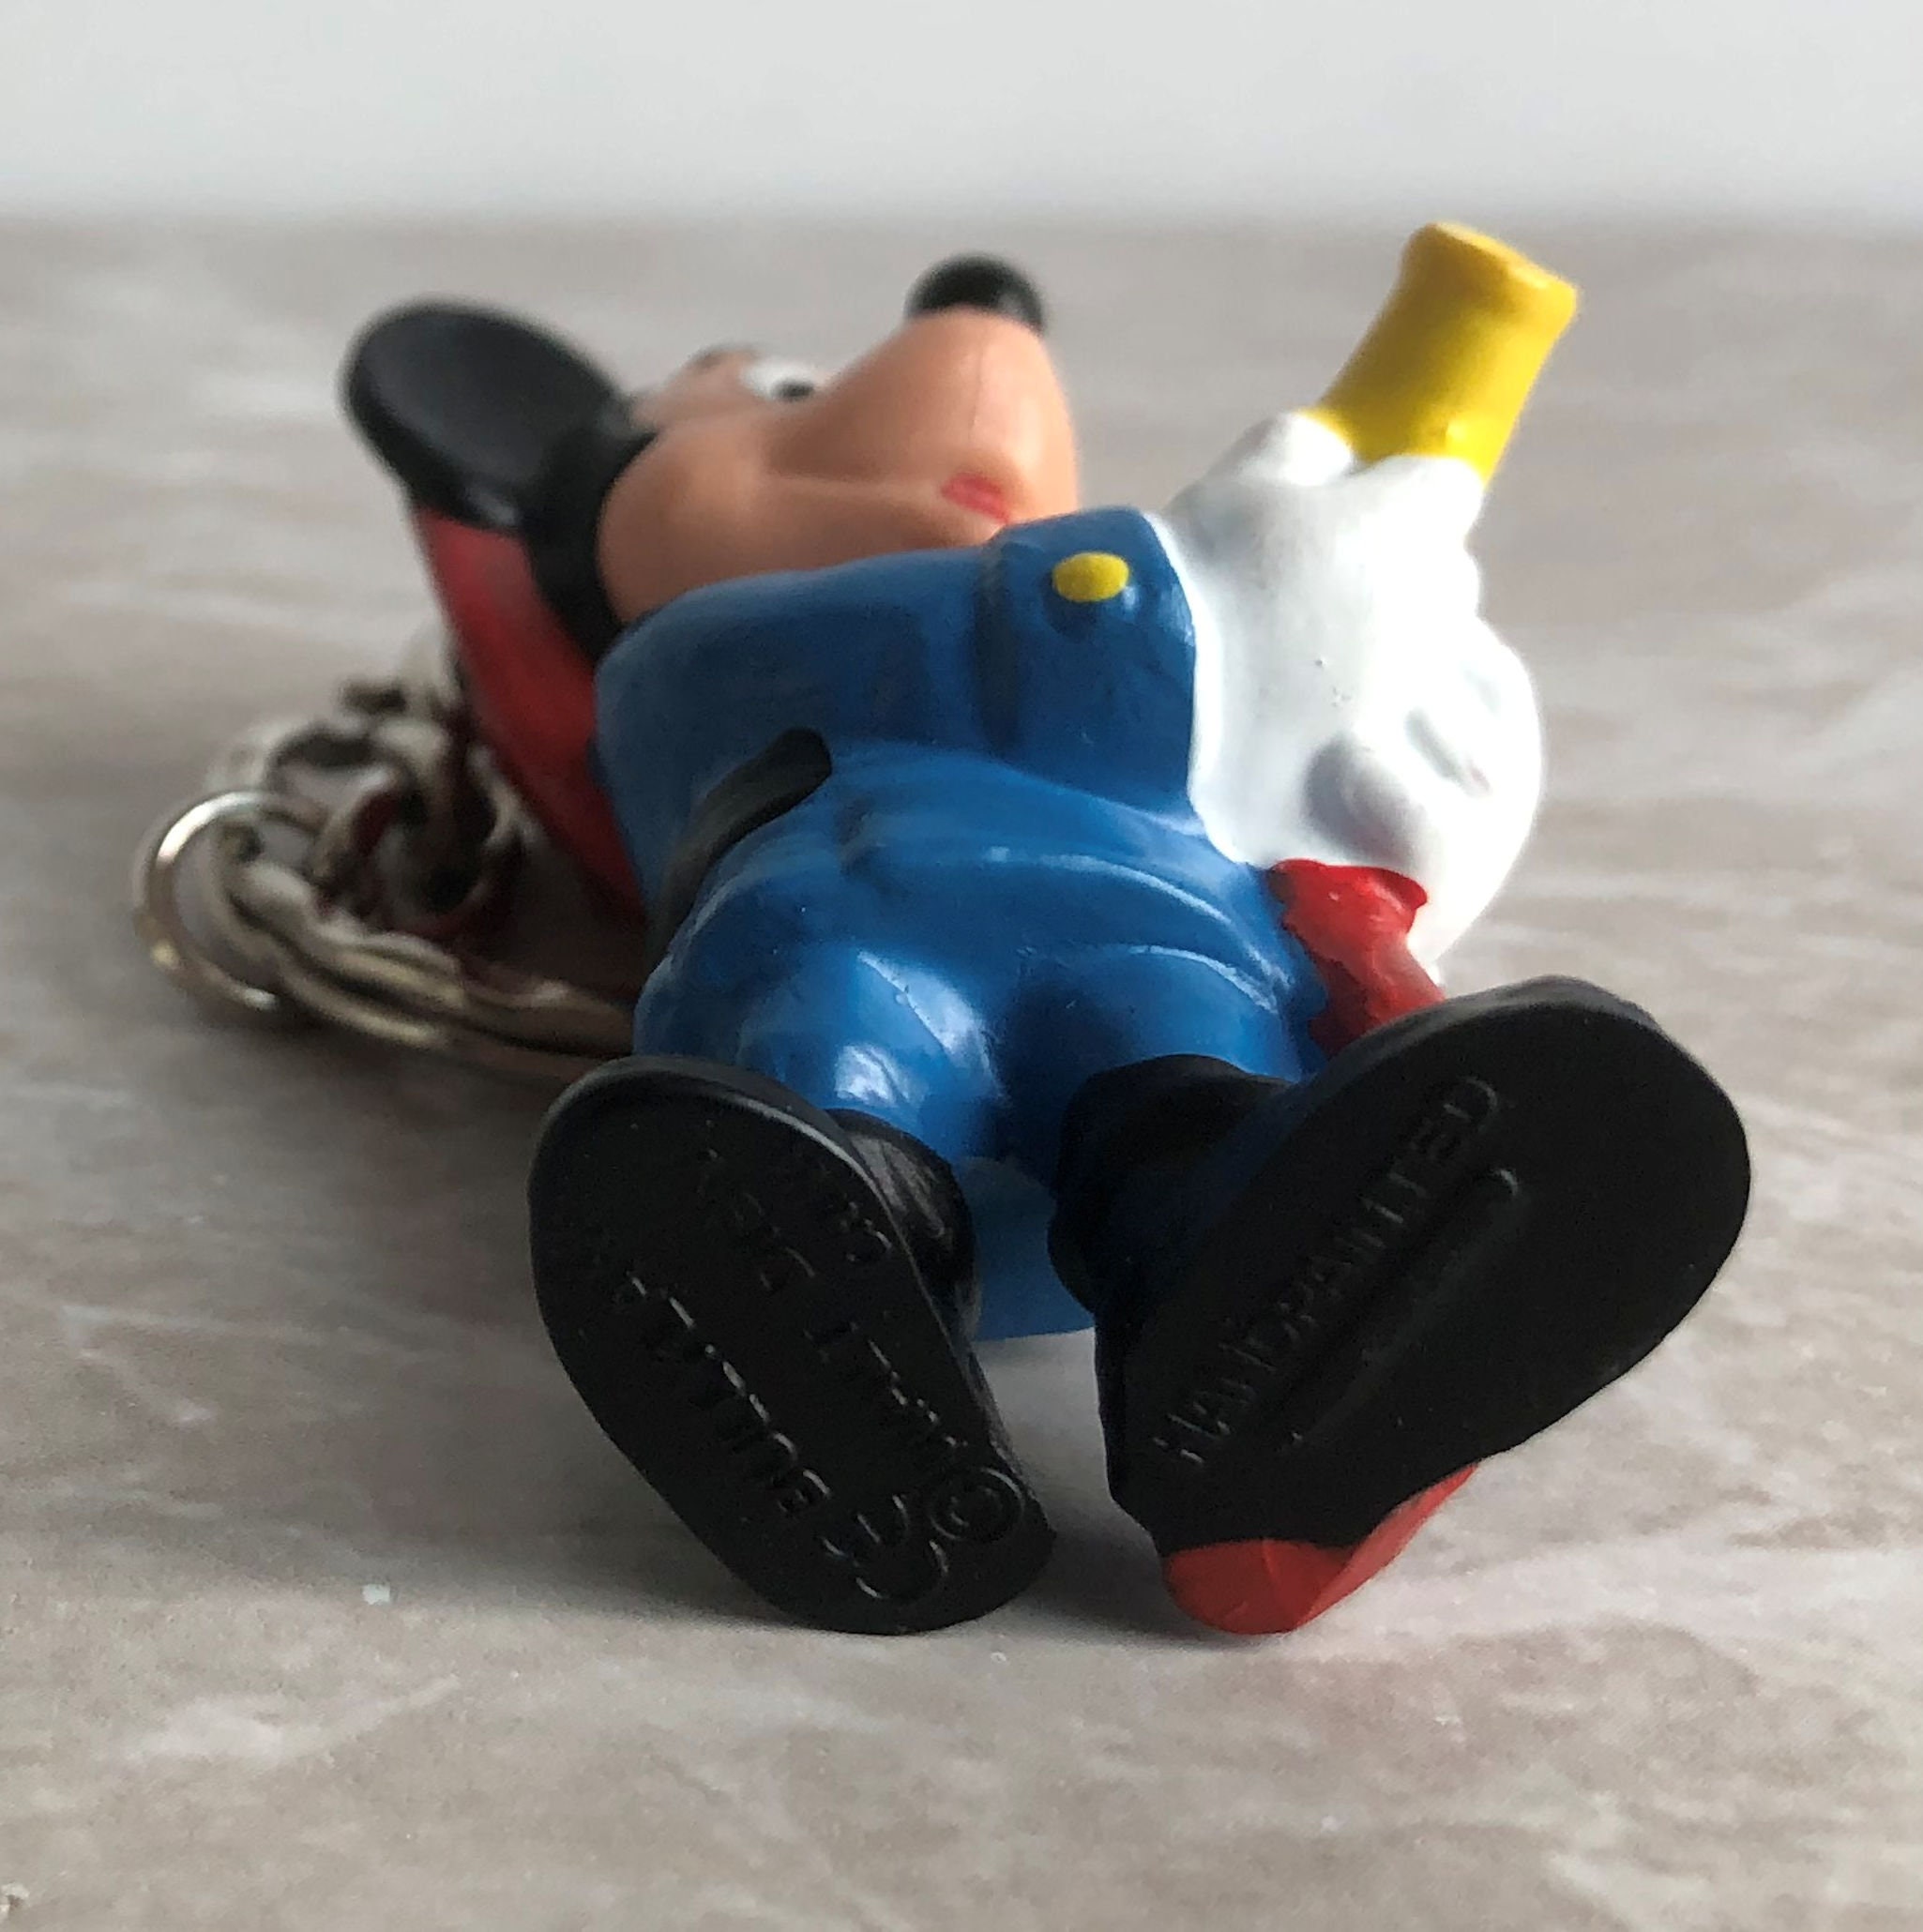 Vintage Disney Bullyland Mickey Mouse as a Fireman with Hose | Etsy